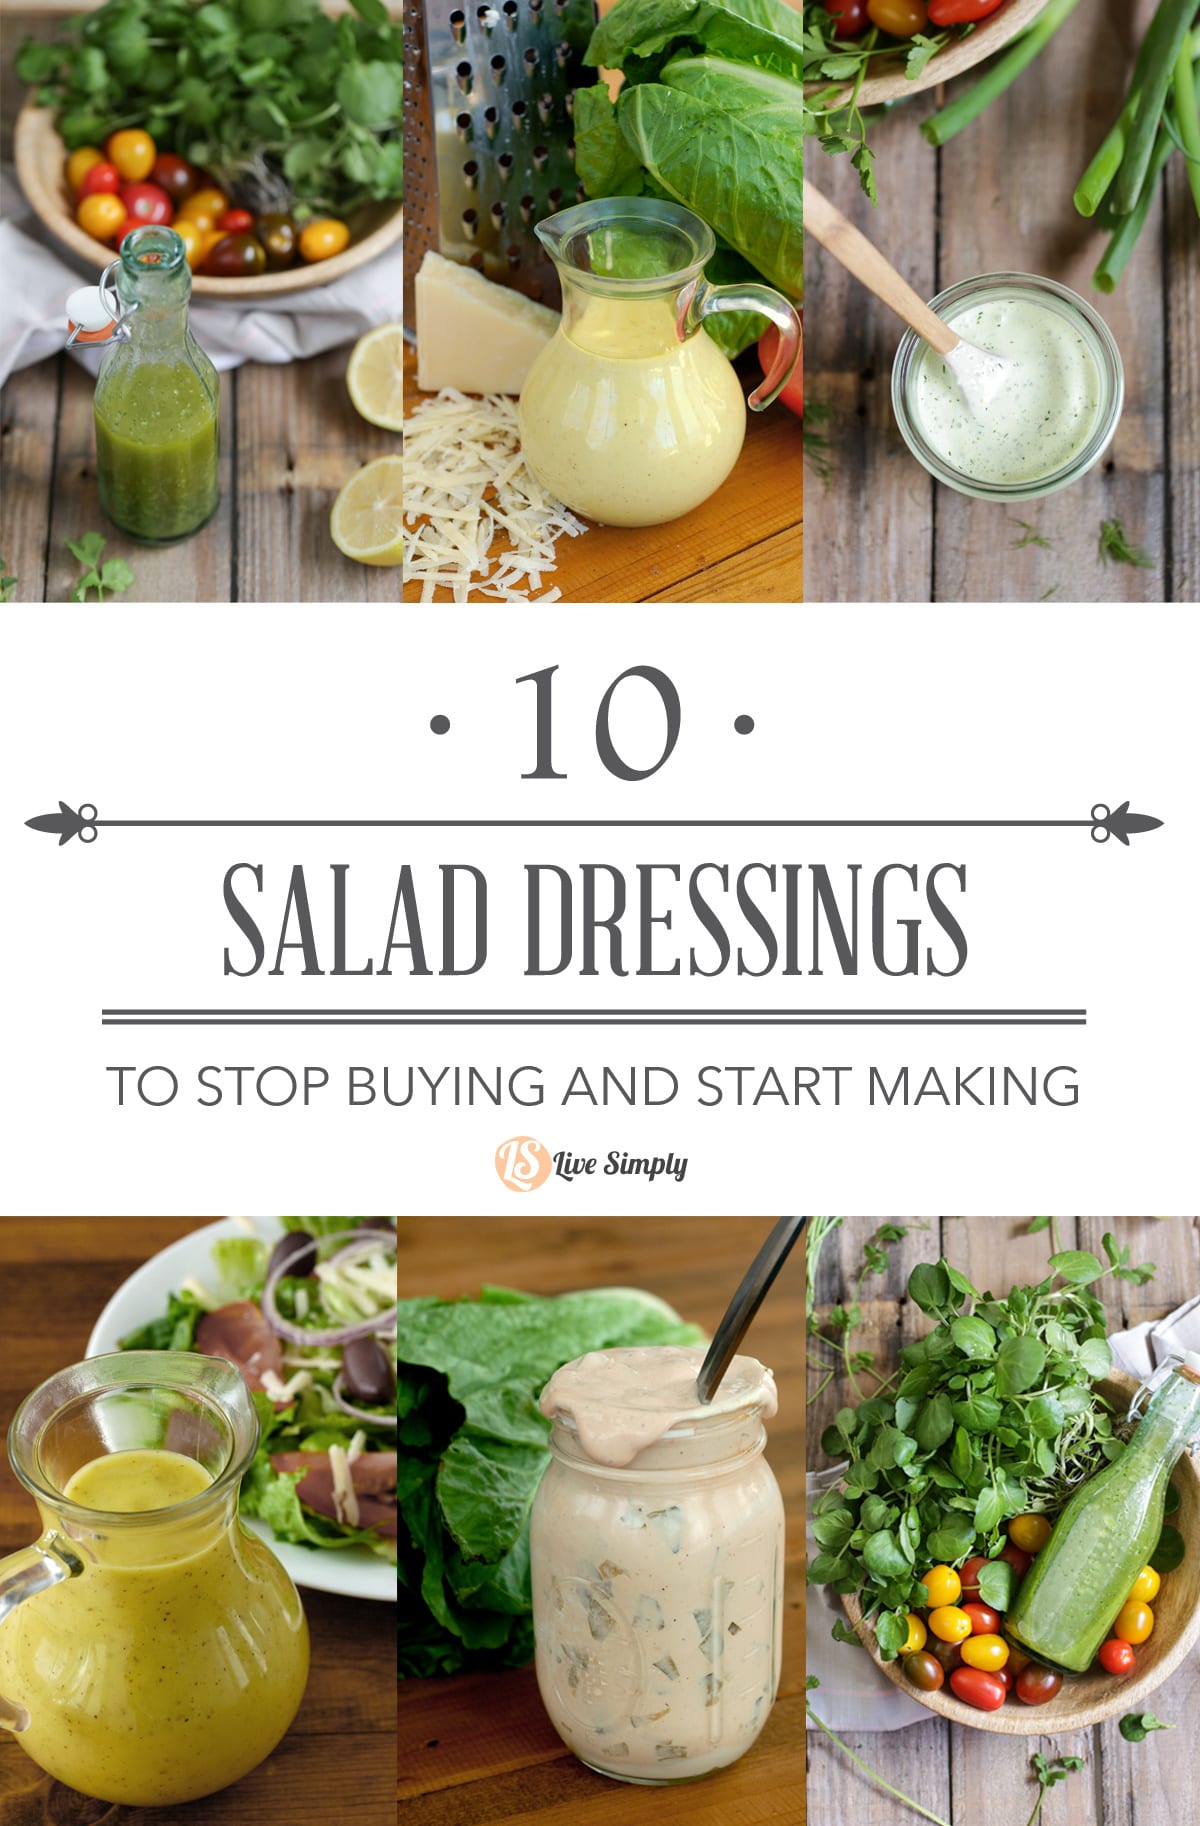 10 Salad Dressings to Stop Buying and Start Making